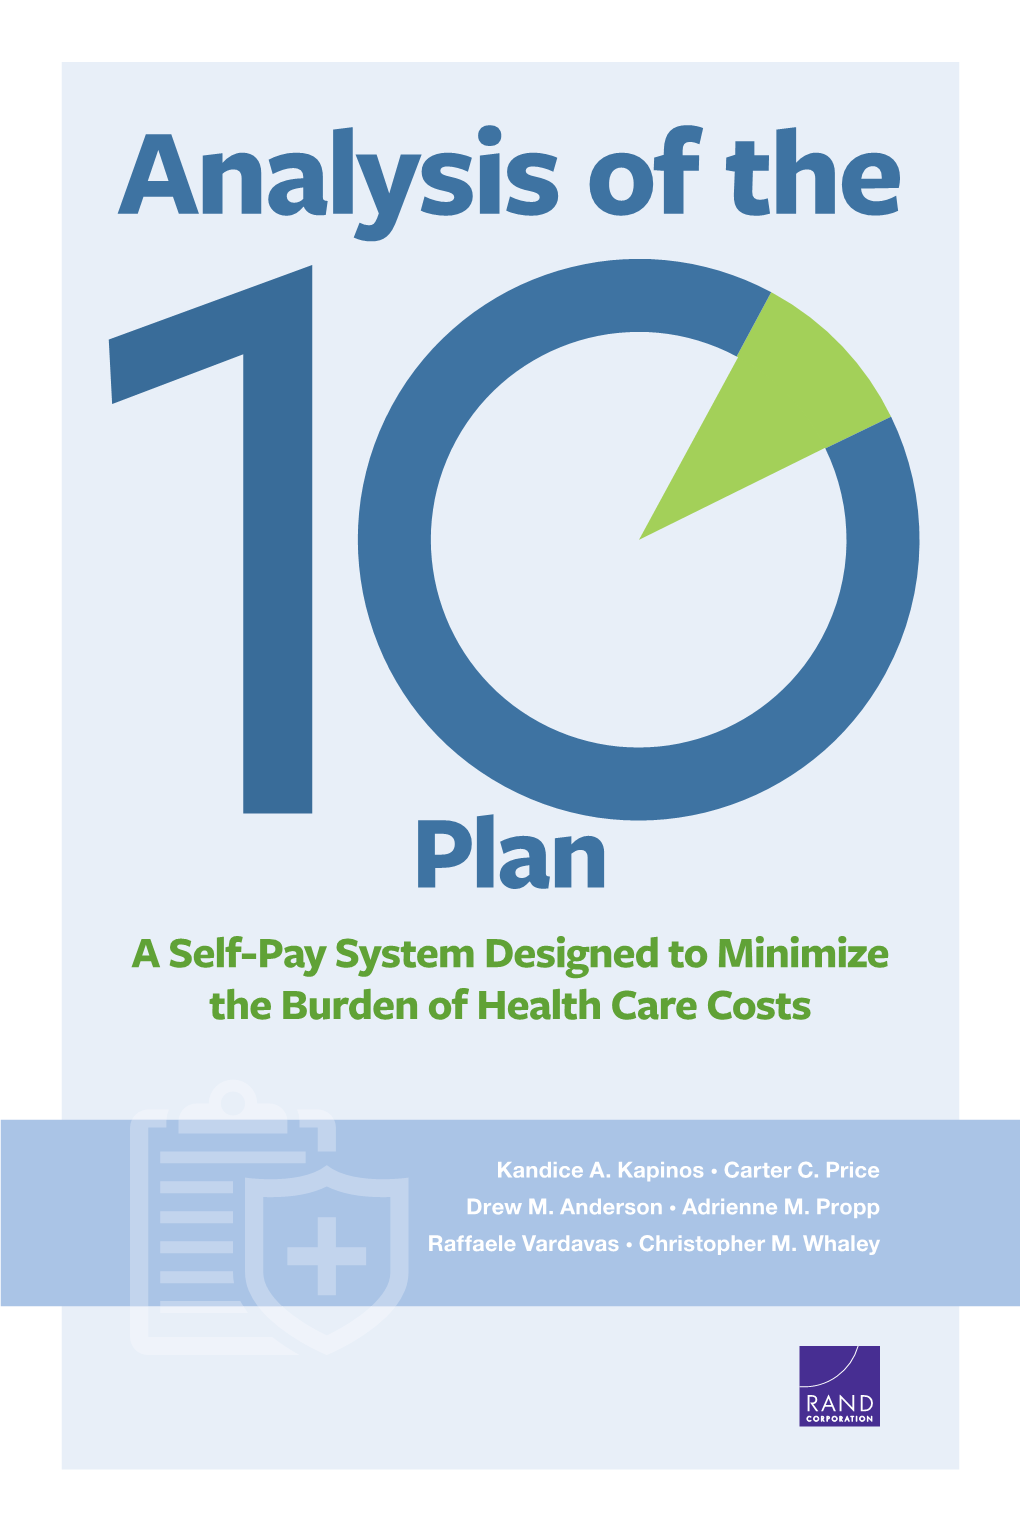 Analysis of the 10Plan: a Self-Pay System Designed to Minimize the Burden of Health Care Costs